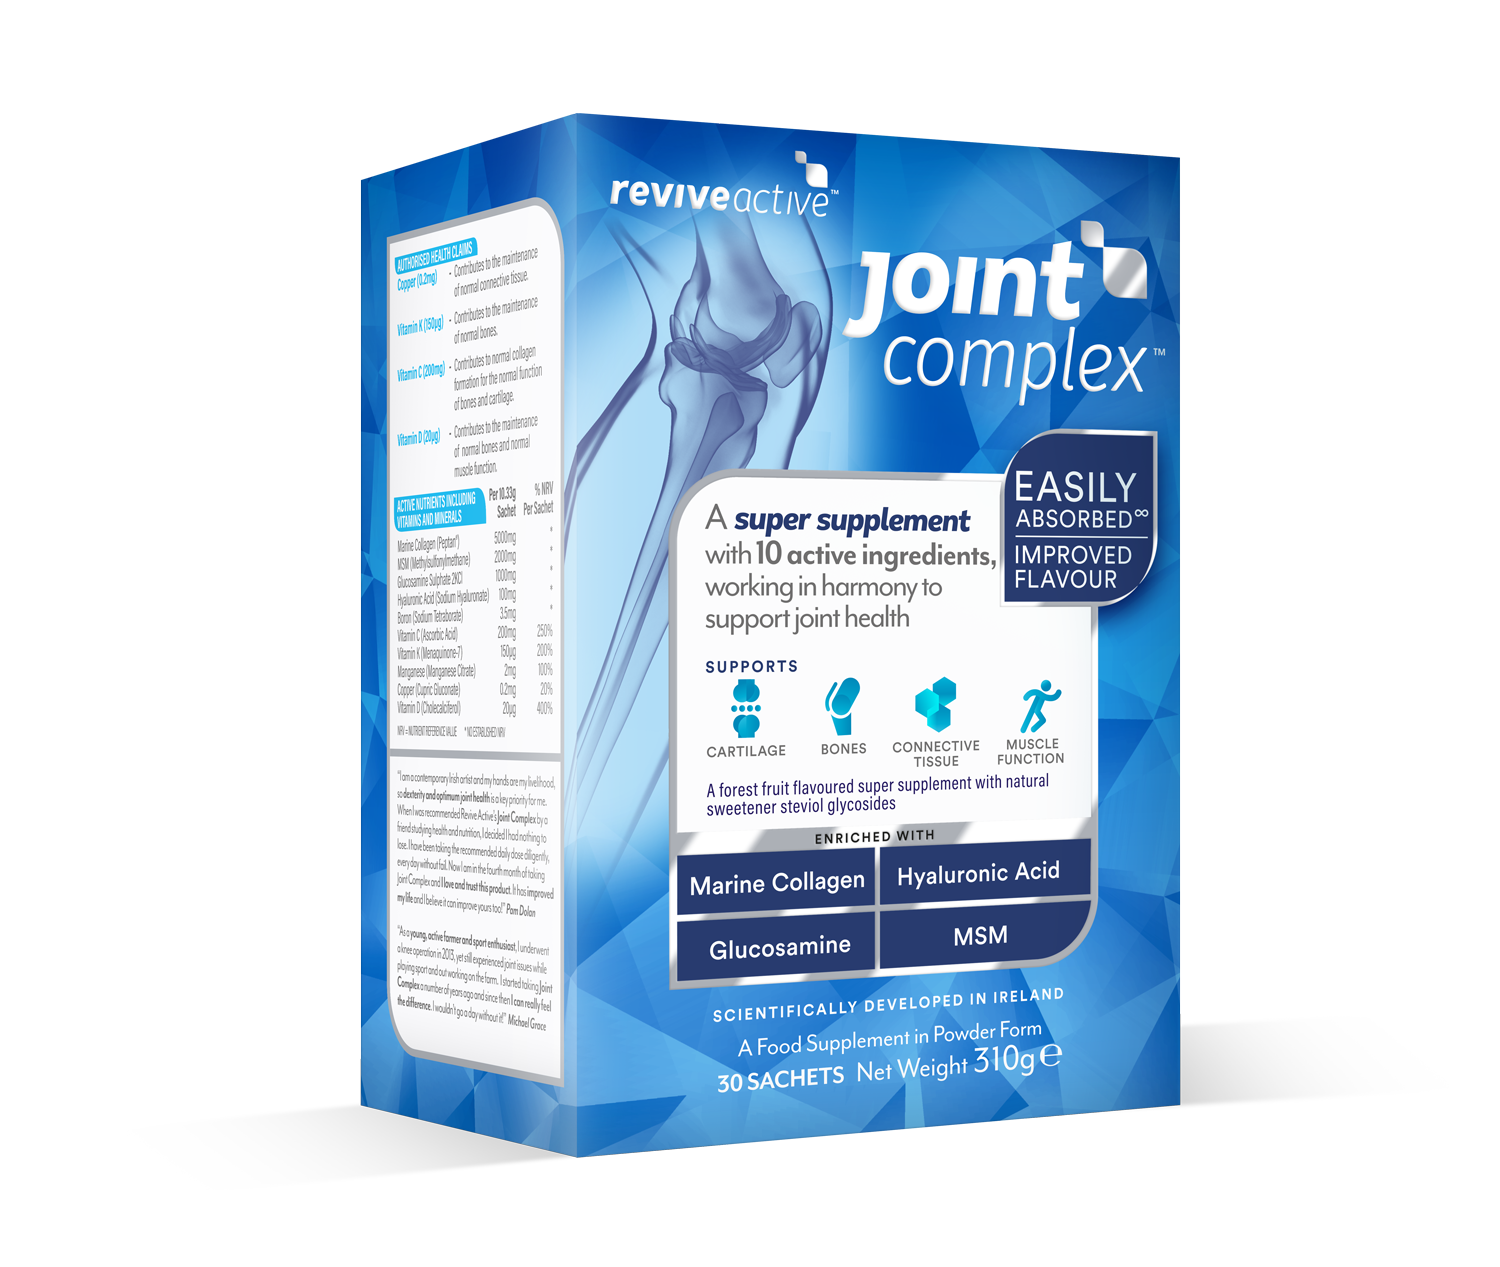 Revive joint